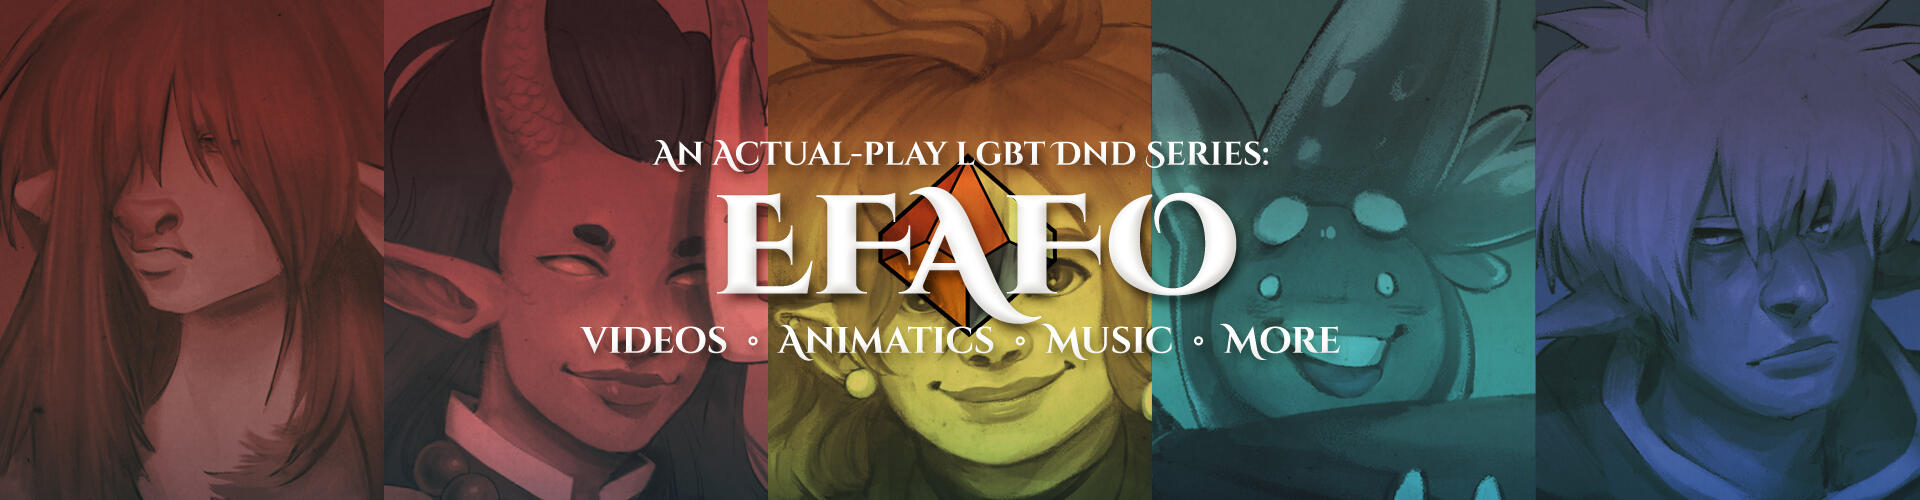 An actual-play LGBT DND series: EFAFO-- videos, animatics, music, and more